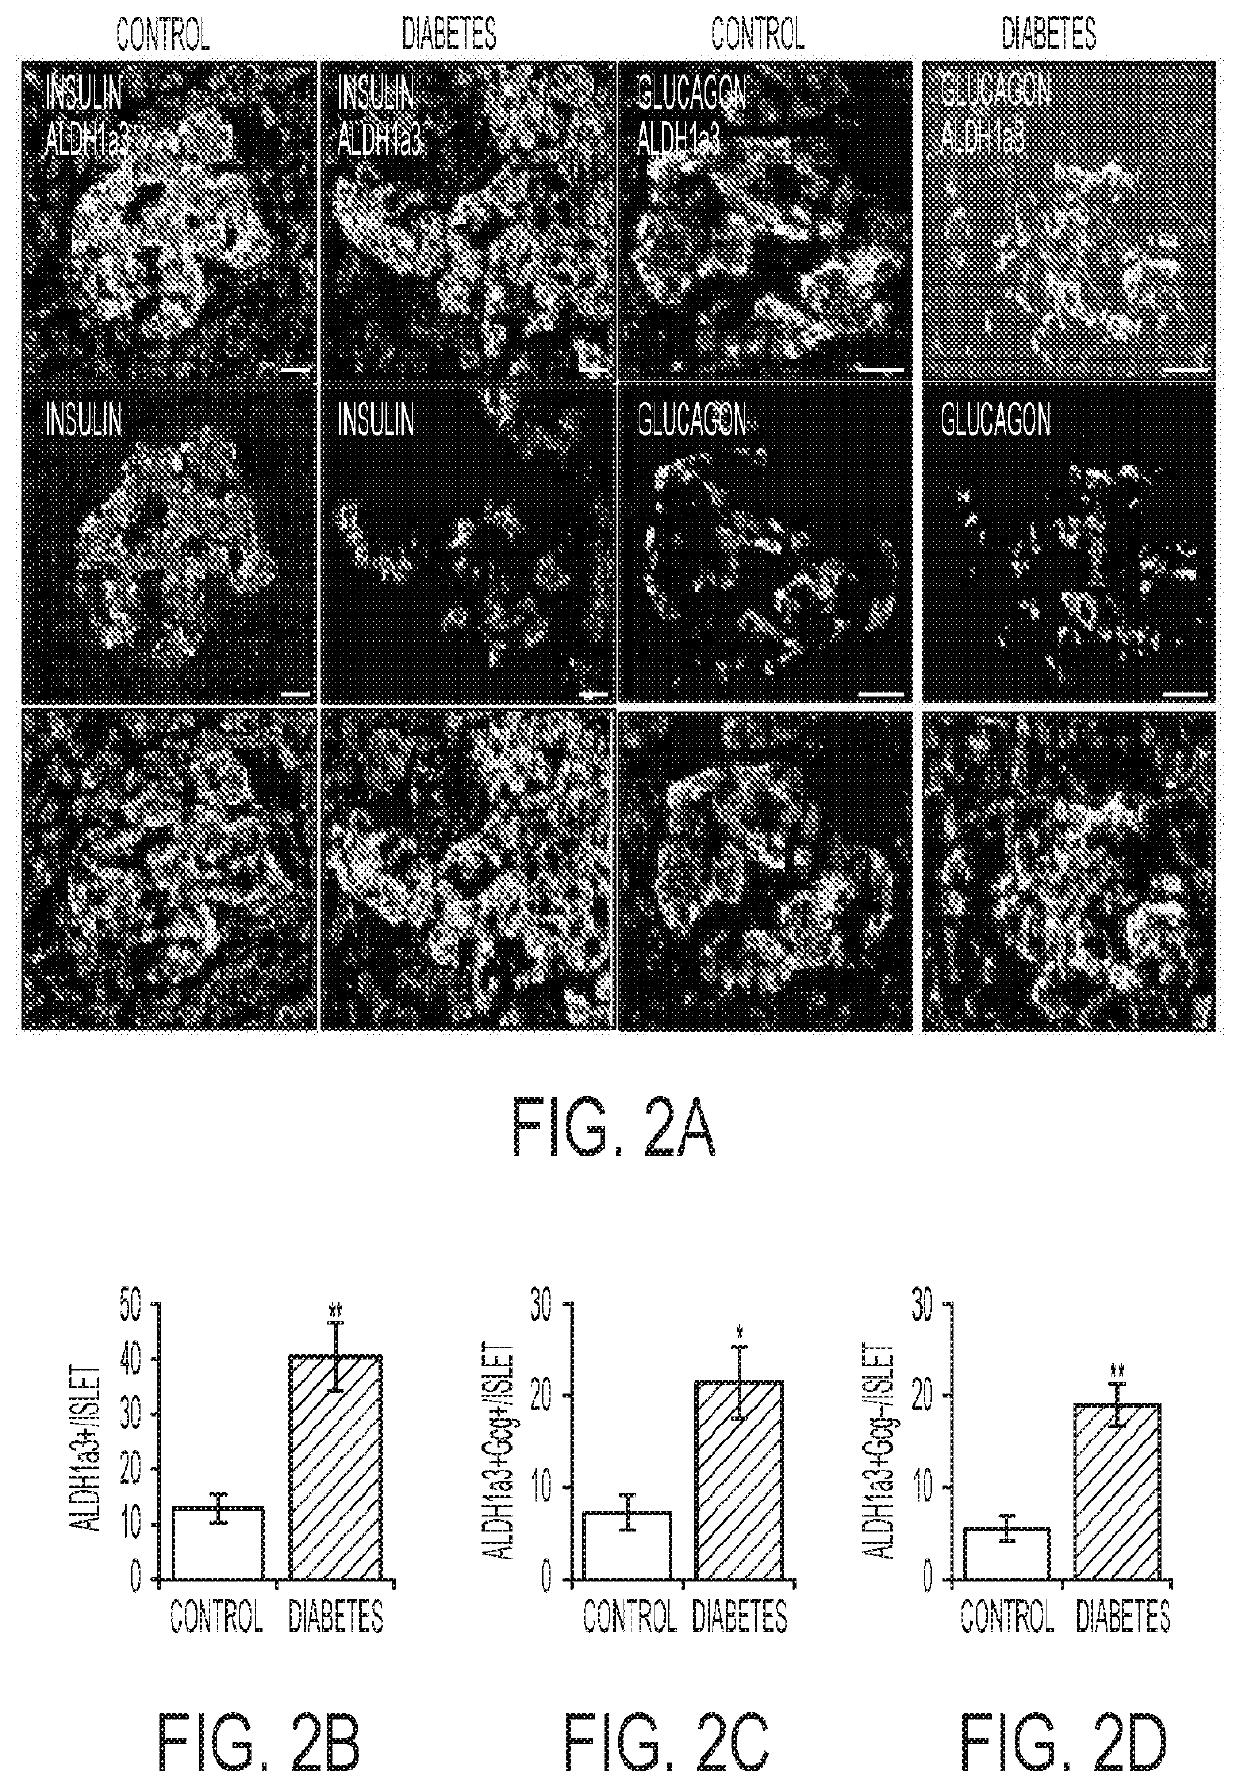 Use of aldehyde dehydrogenase as biomarker for beta-cell dysfunction and loss